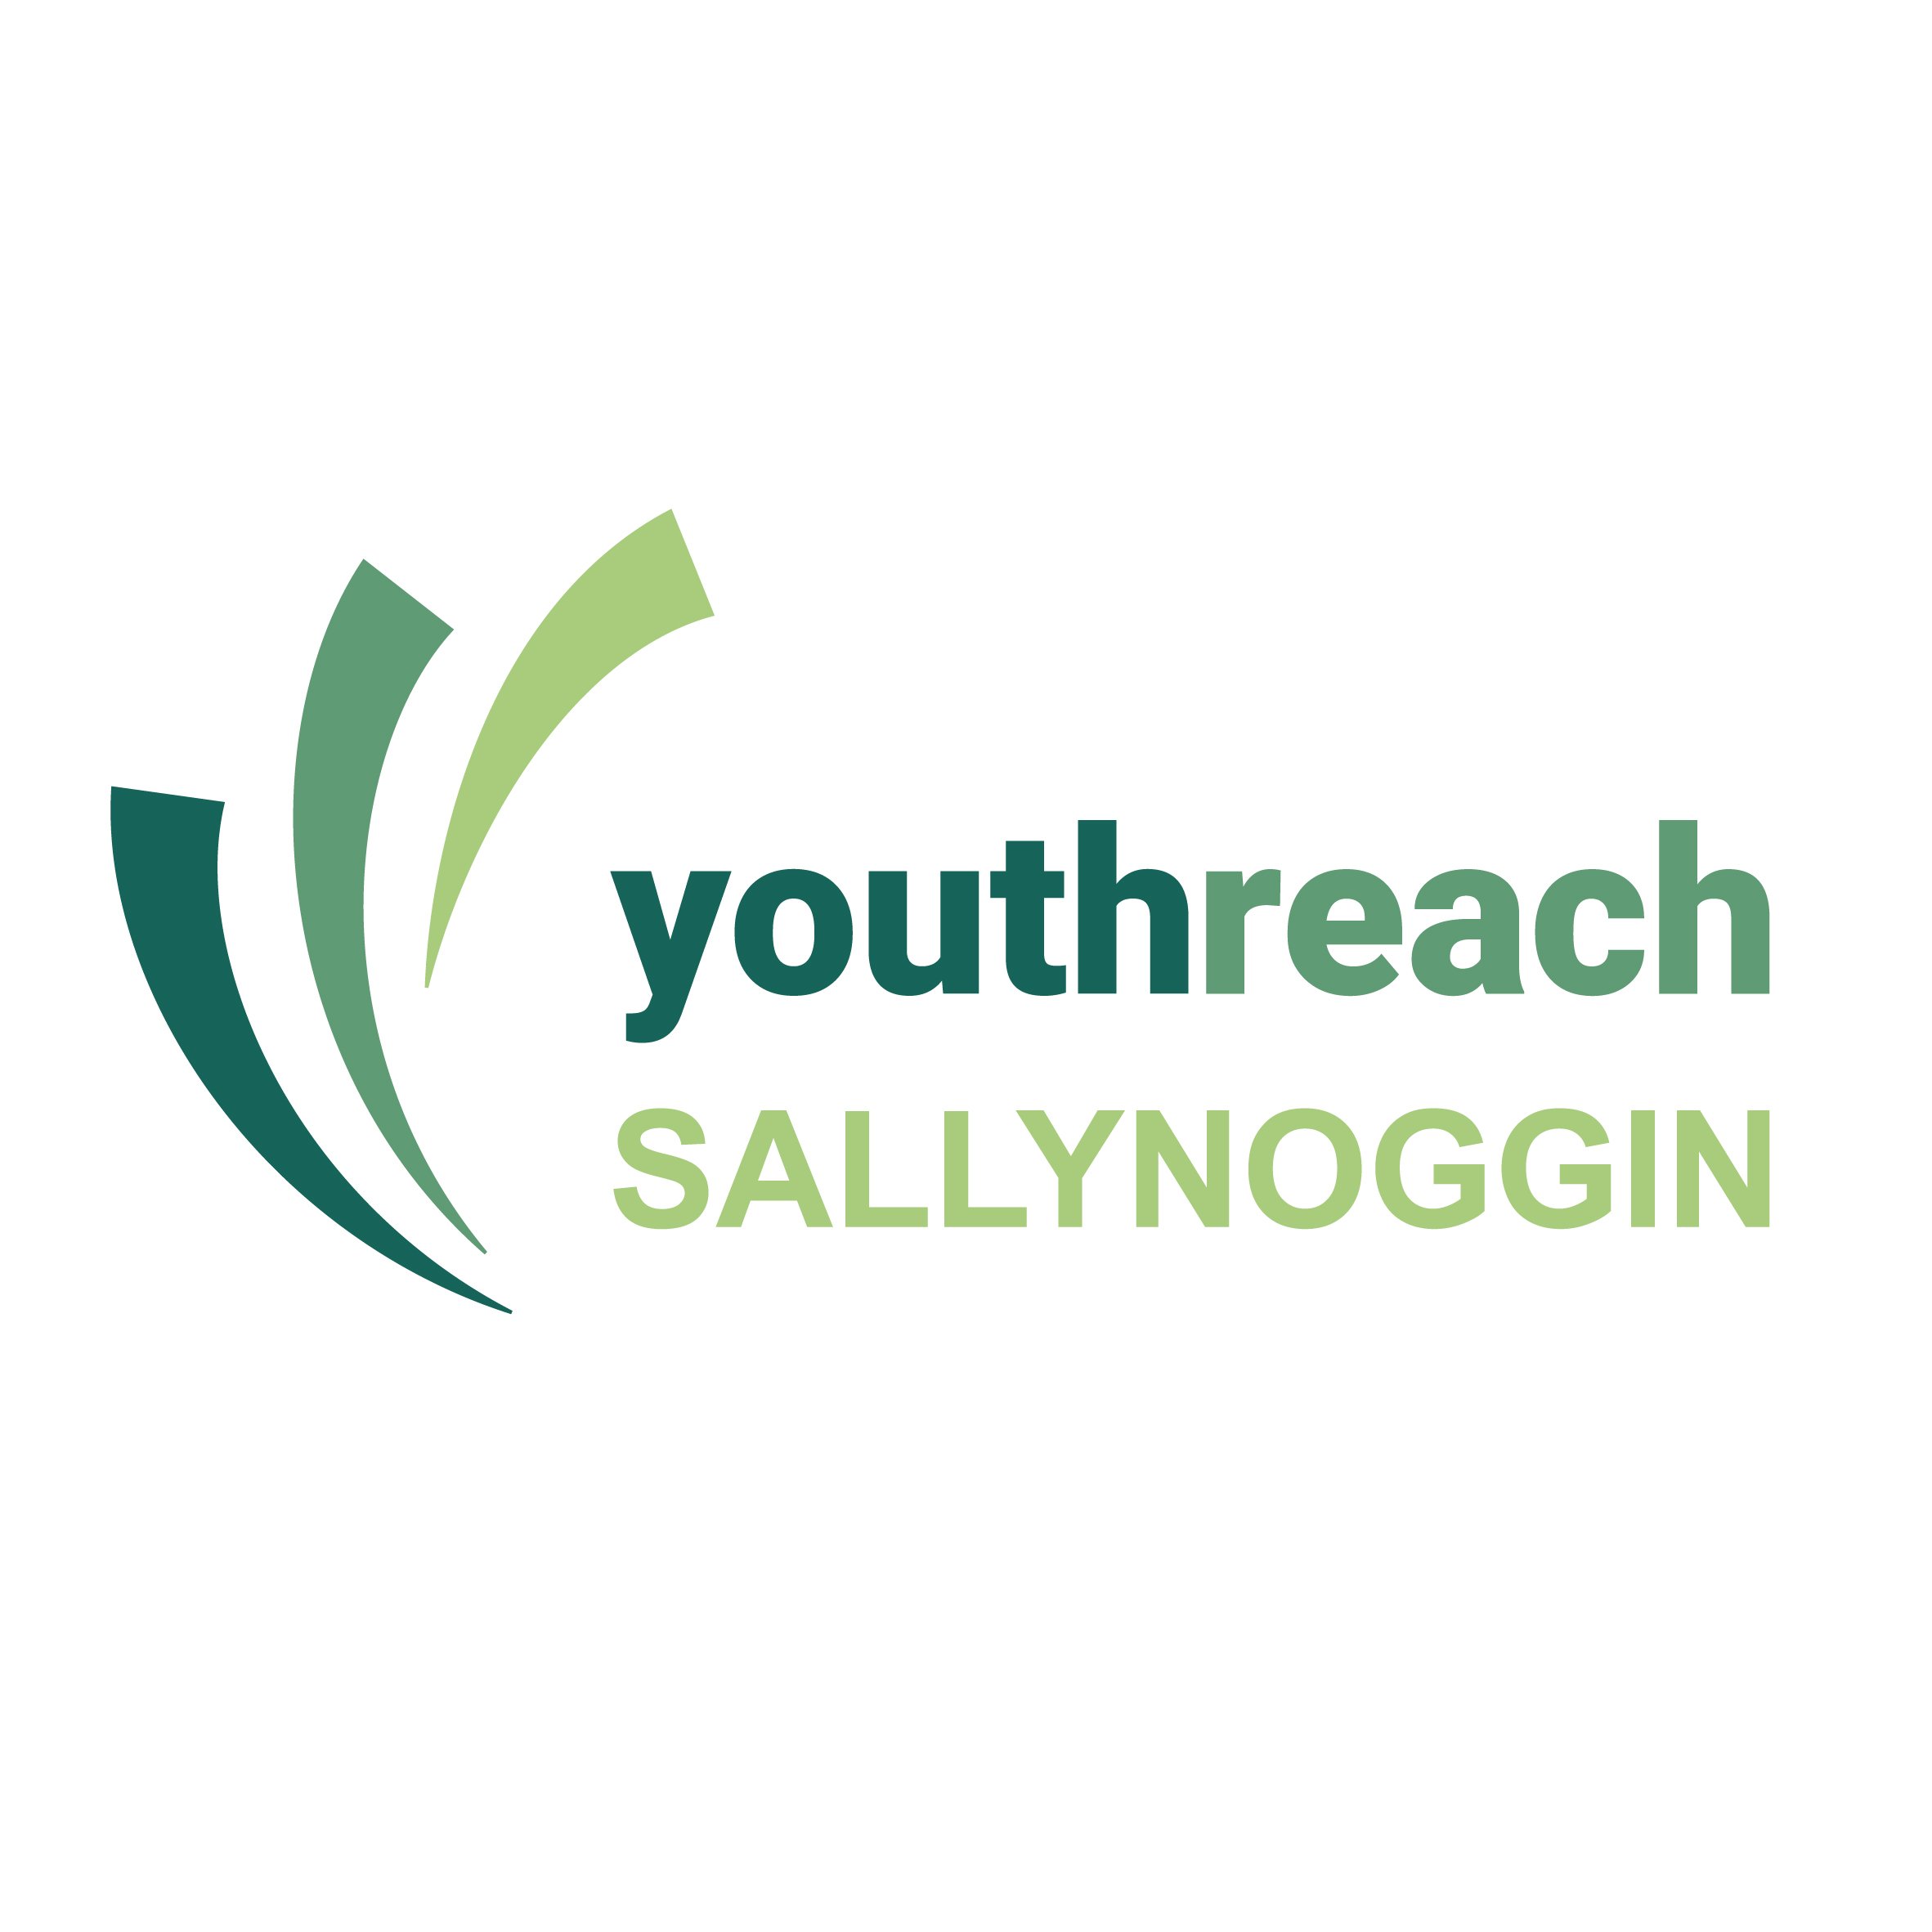 Salynoggin Youthreach which is part of Dublin & Dun Laoghaire ETB caters for 15-20 year olds who want to complete their education